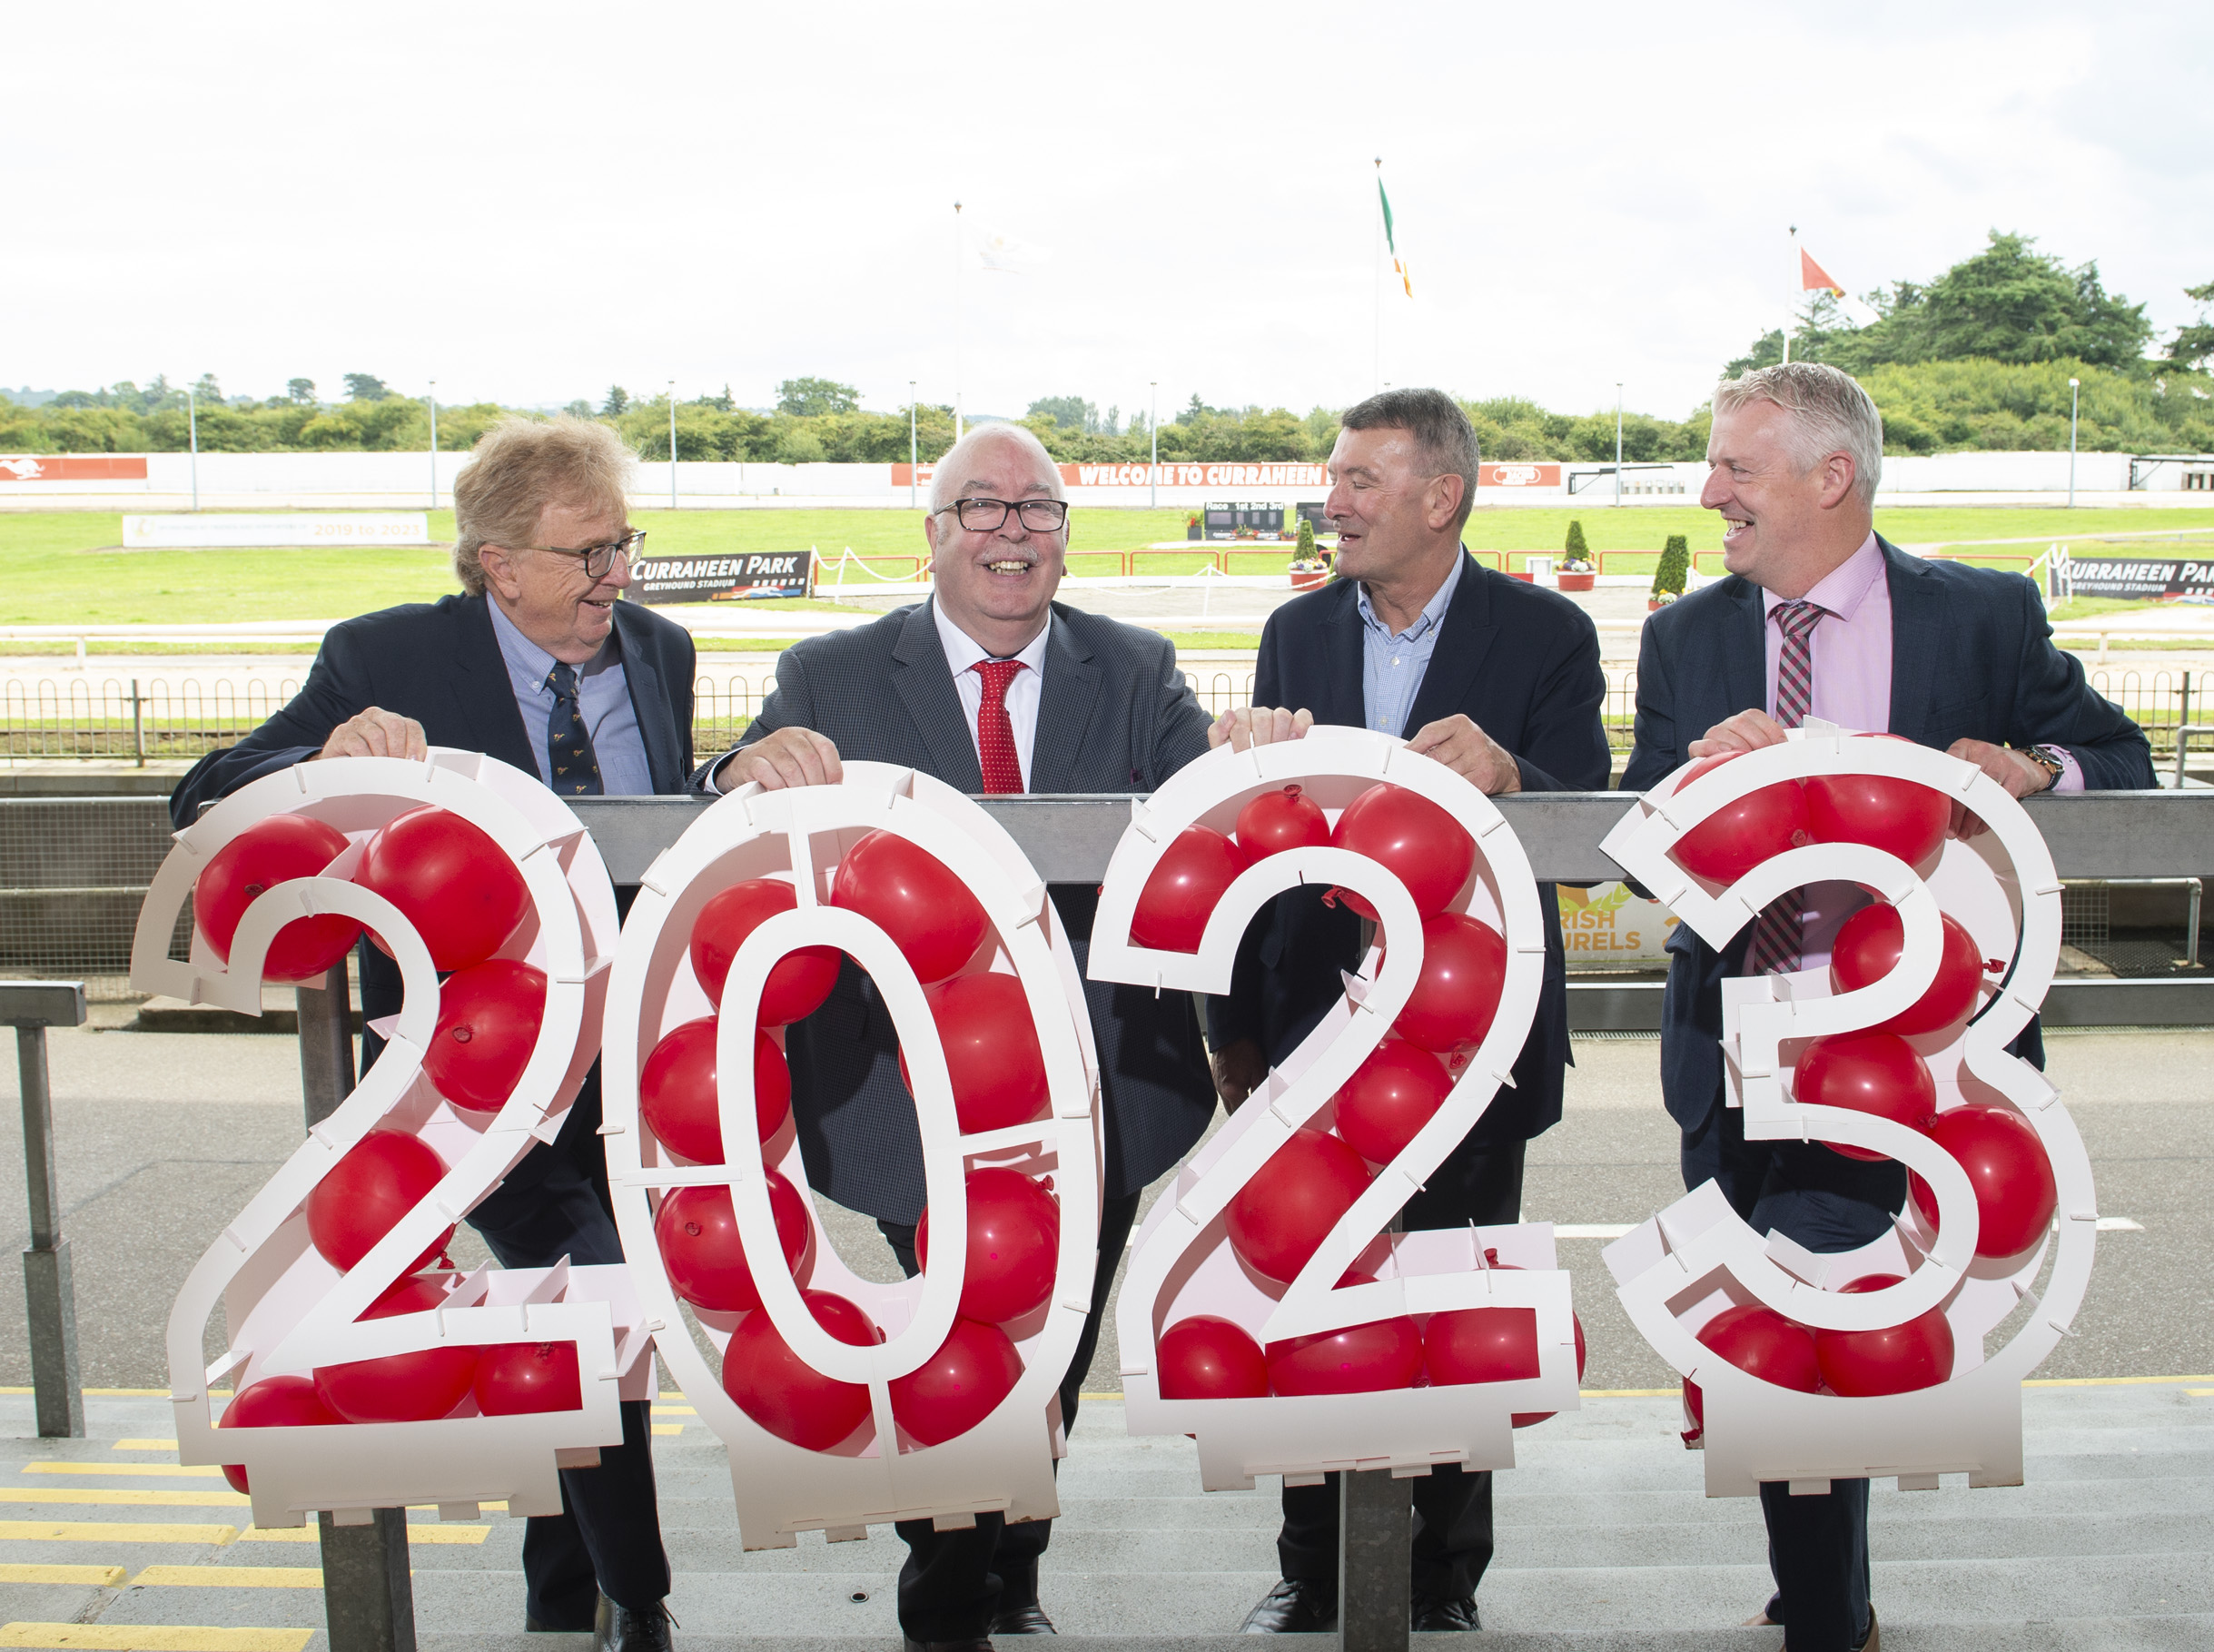 Frank Nyhan (Chairman GRI), Barney O'Hare (Bar One Racing), Jimmy Barry Murphy & Brian Collins (Curraheen Park) at the sponsorship announcement for the Irish Greyhound Laurels